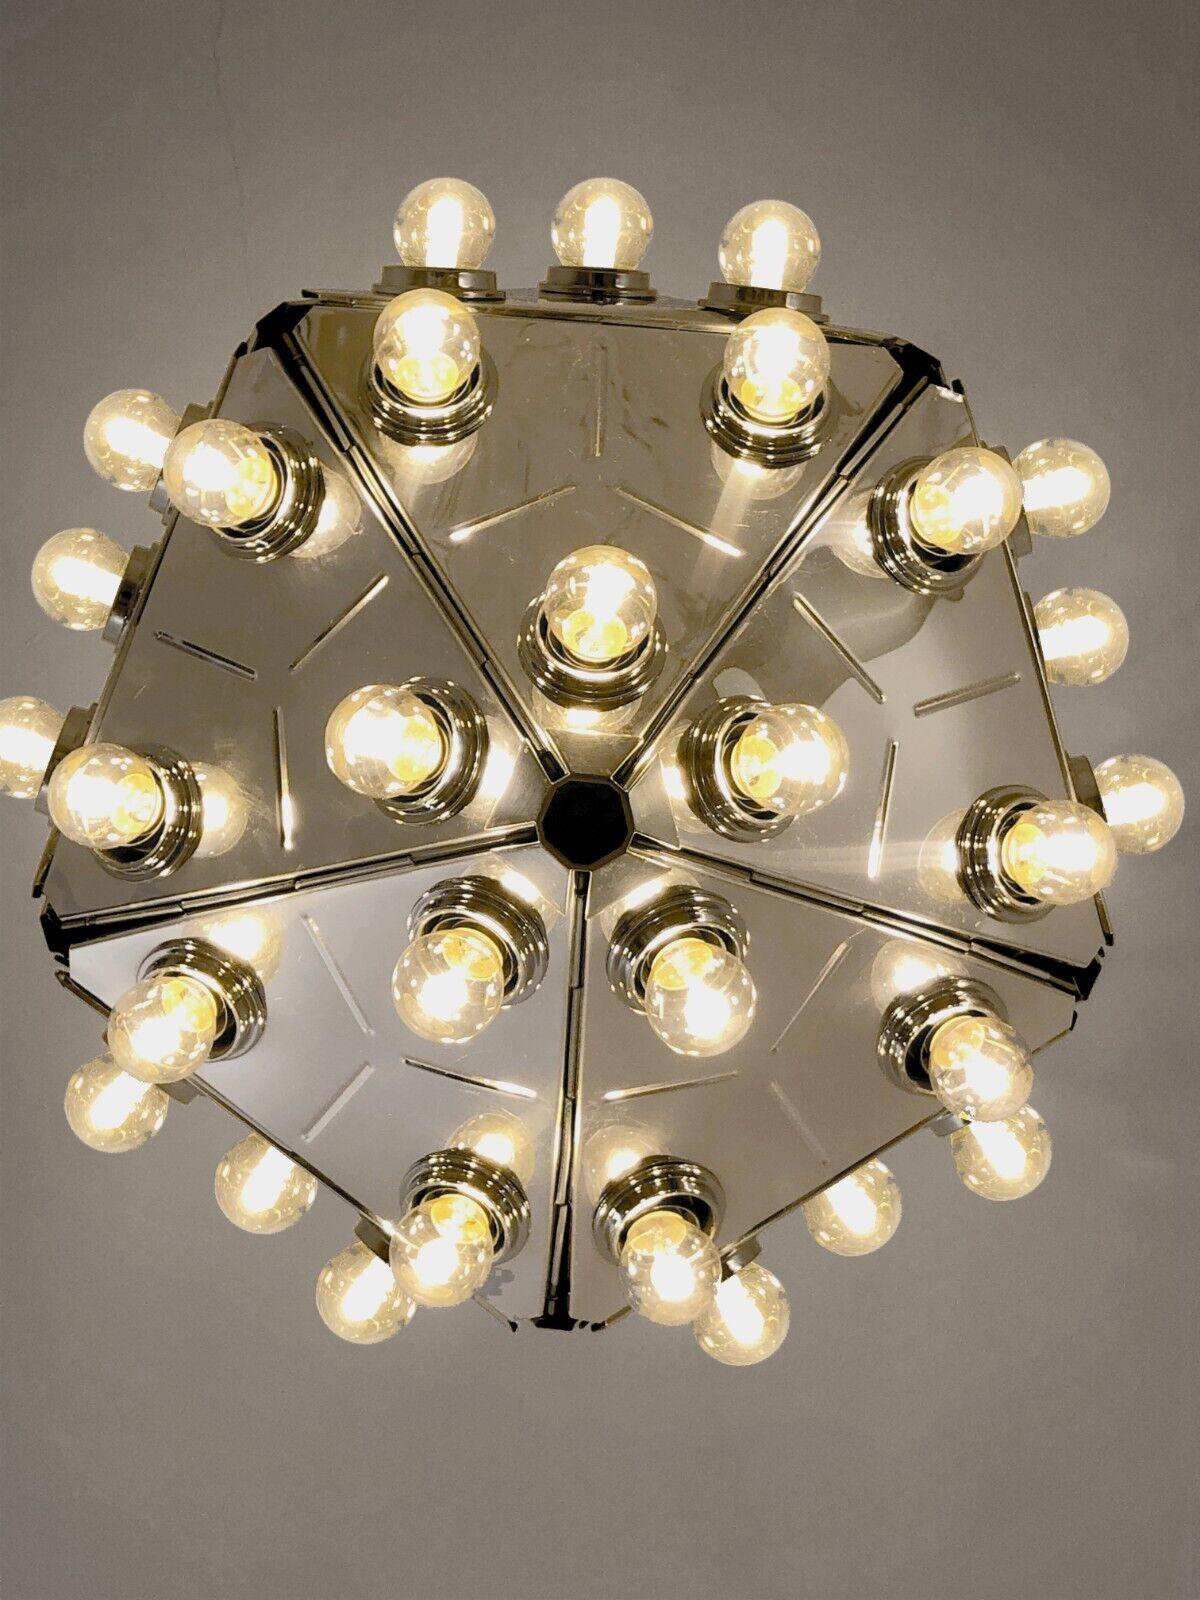 Space Age A 60 Lights POP & SPACE-AGE TARAXACUM CEILING FIXTURE by CASTIGLIONI Italy 1970 For Sale